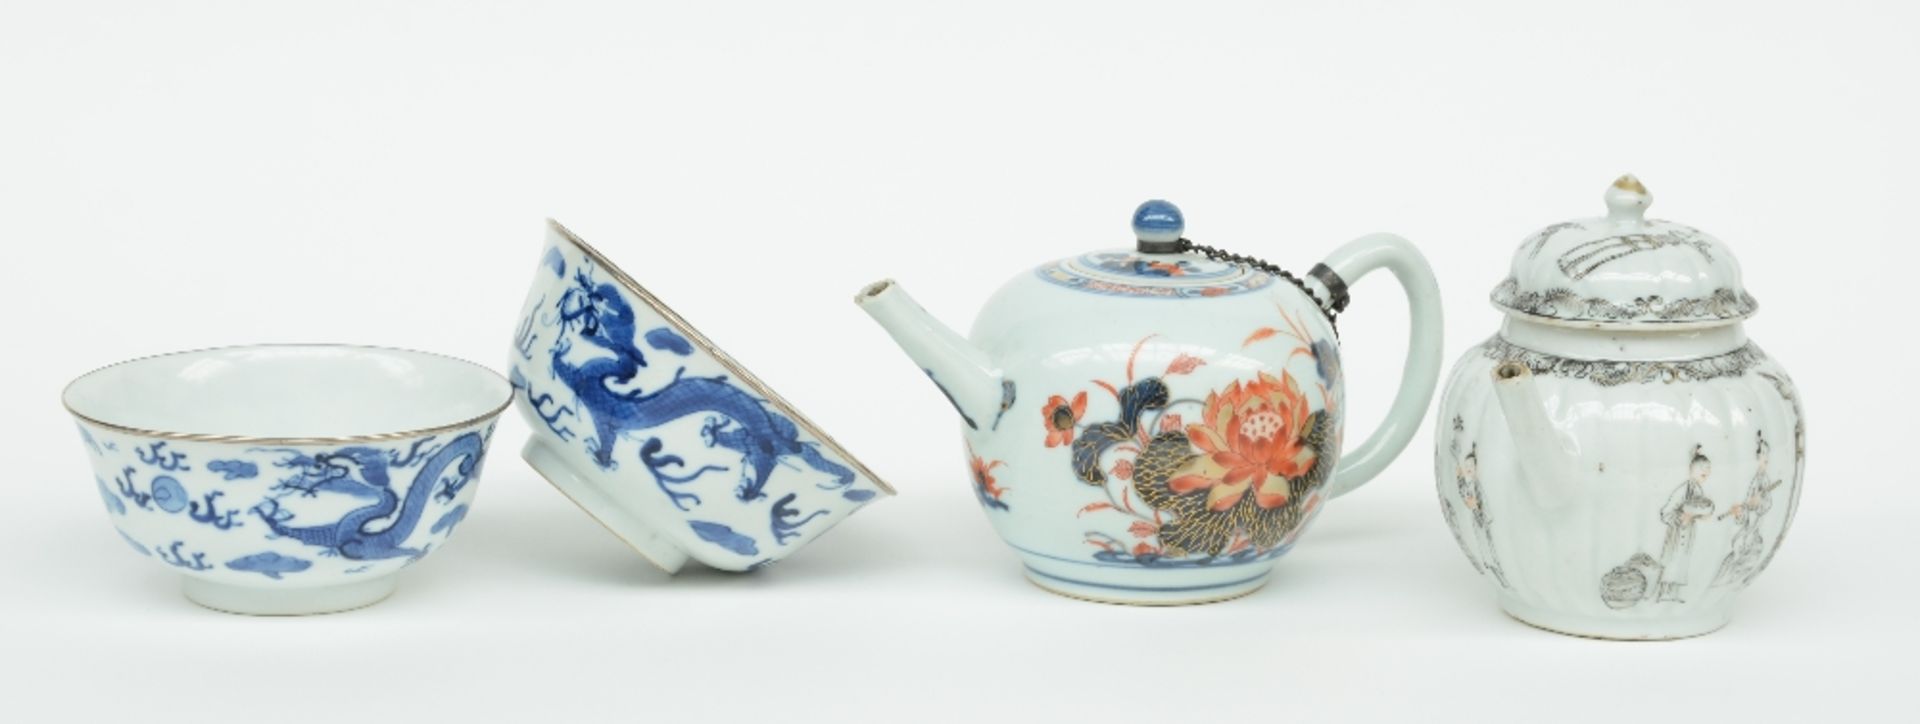 Two Chinese teapots with imari and India ink decoration, 18thC (chips); added two Chinese blue and